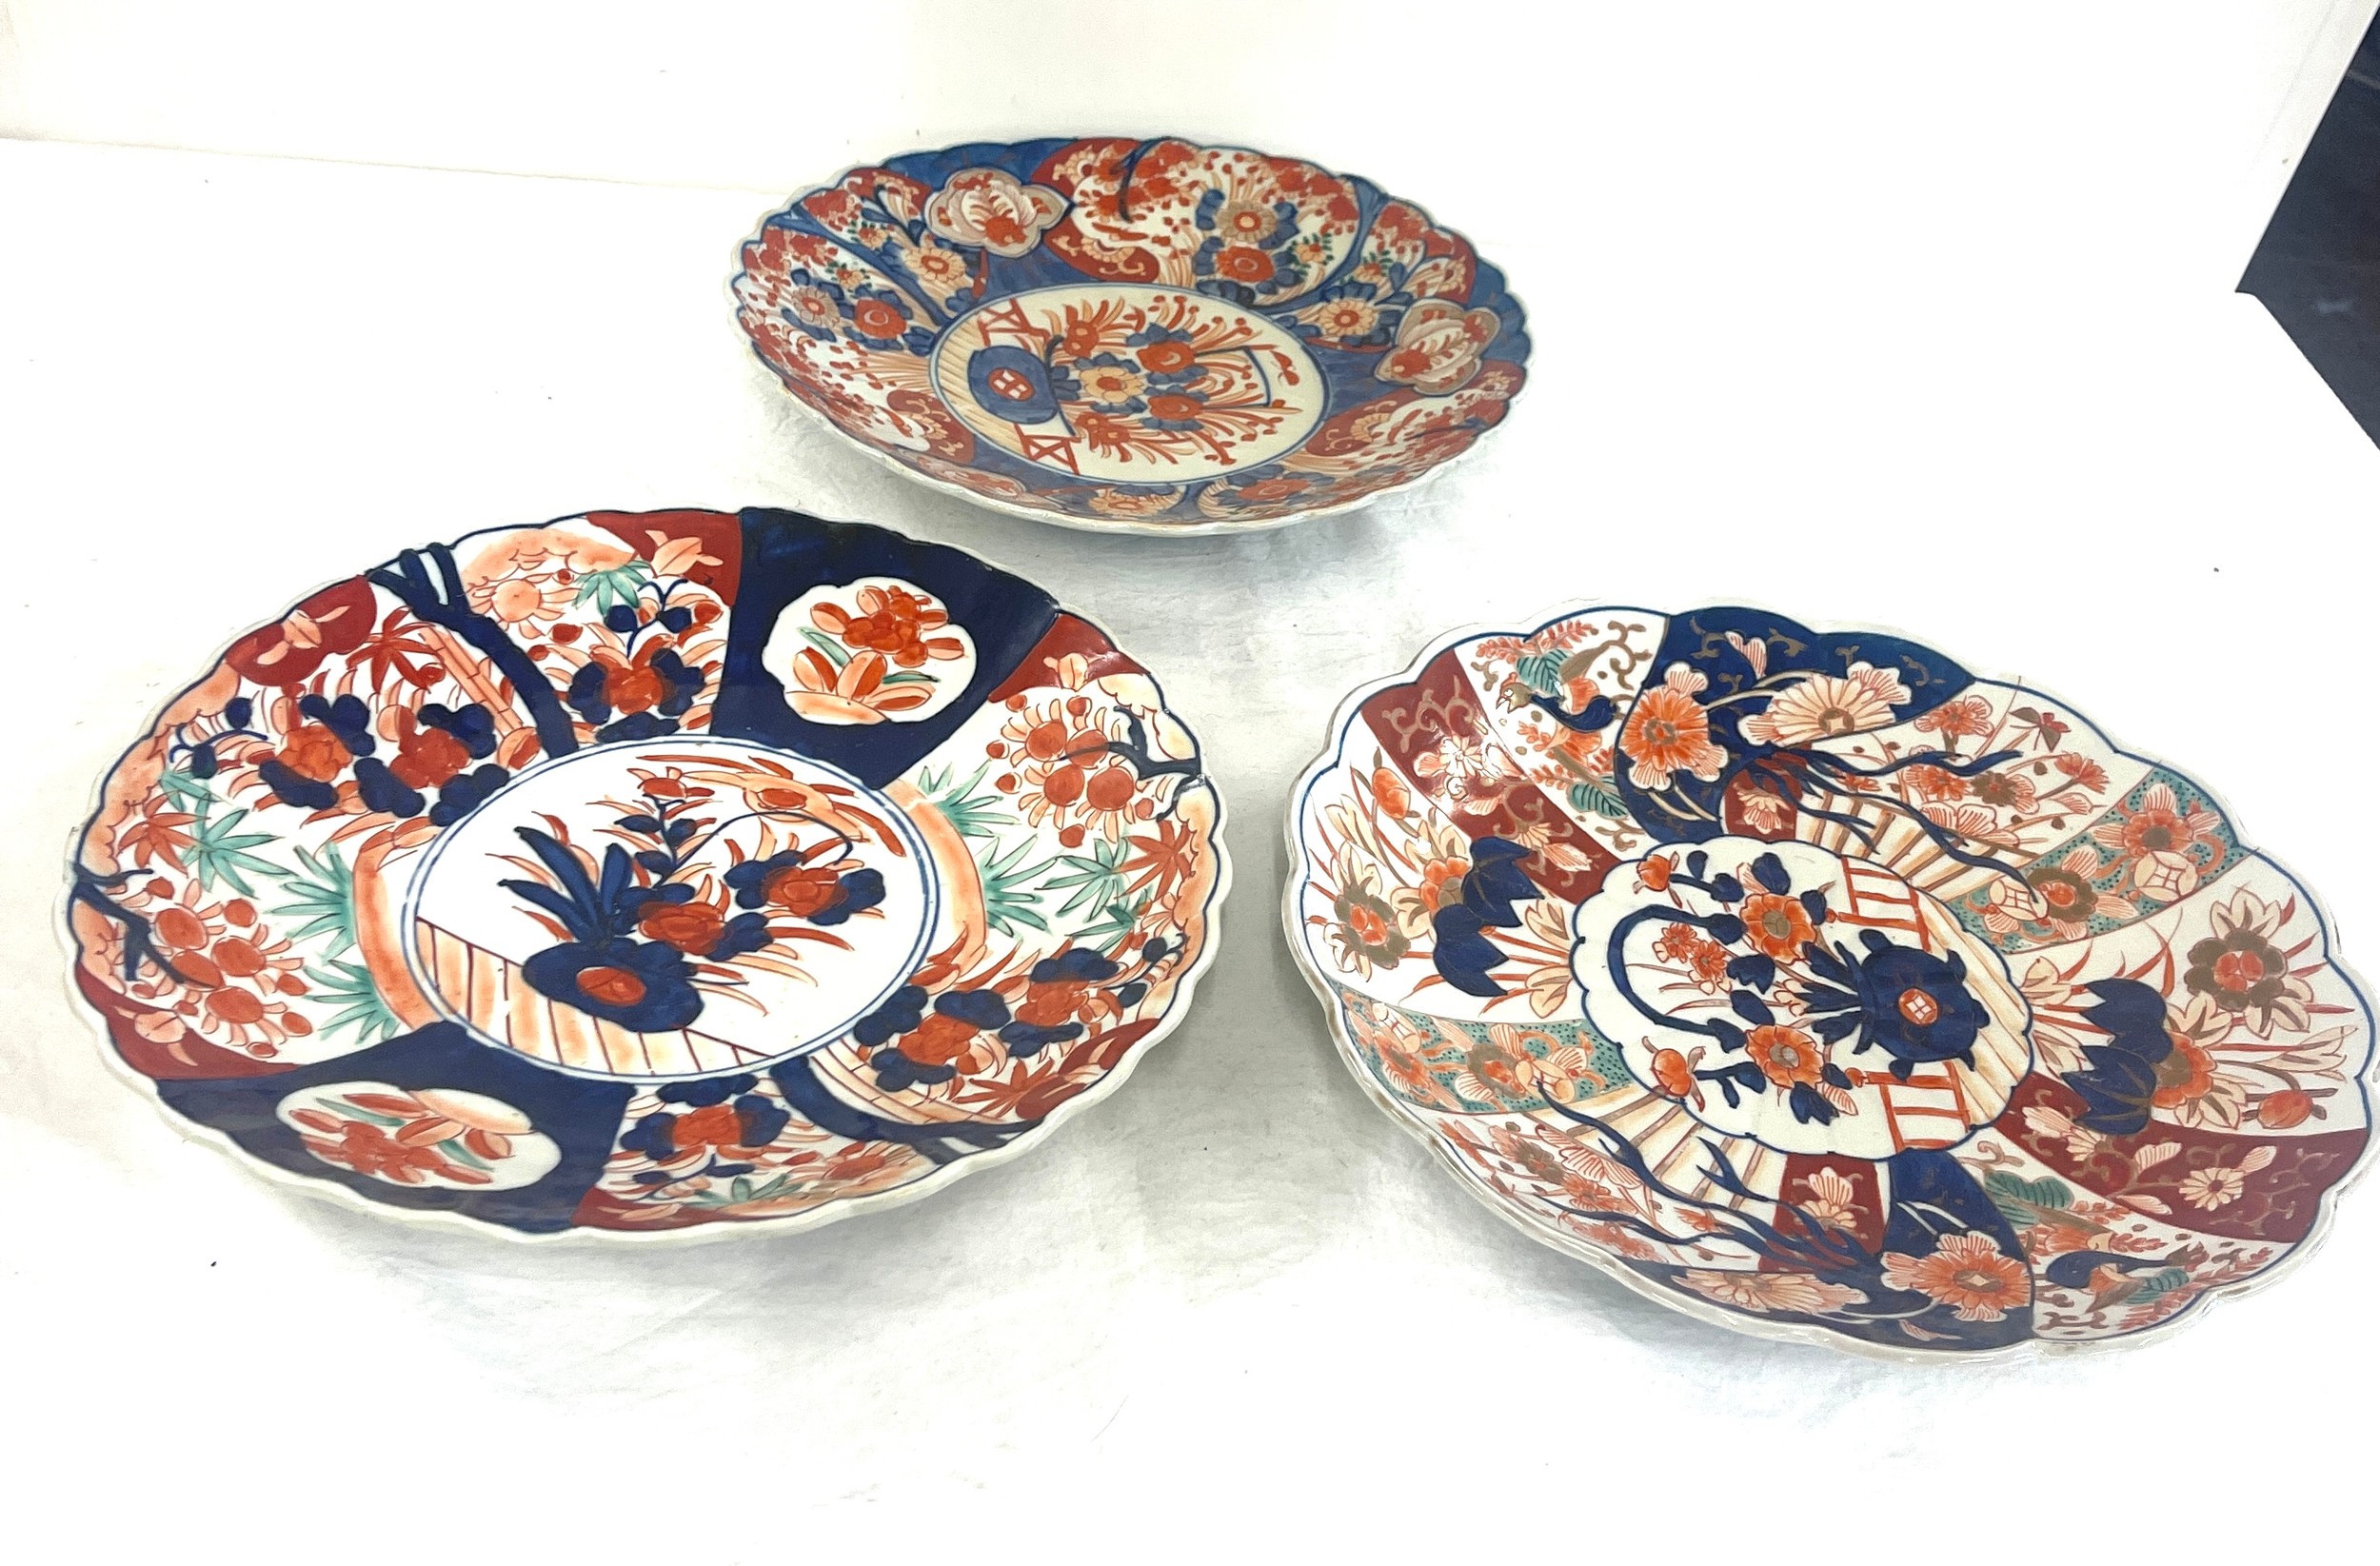 3 Imari chargers measure approx